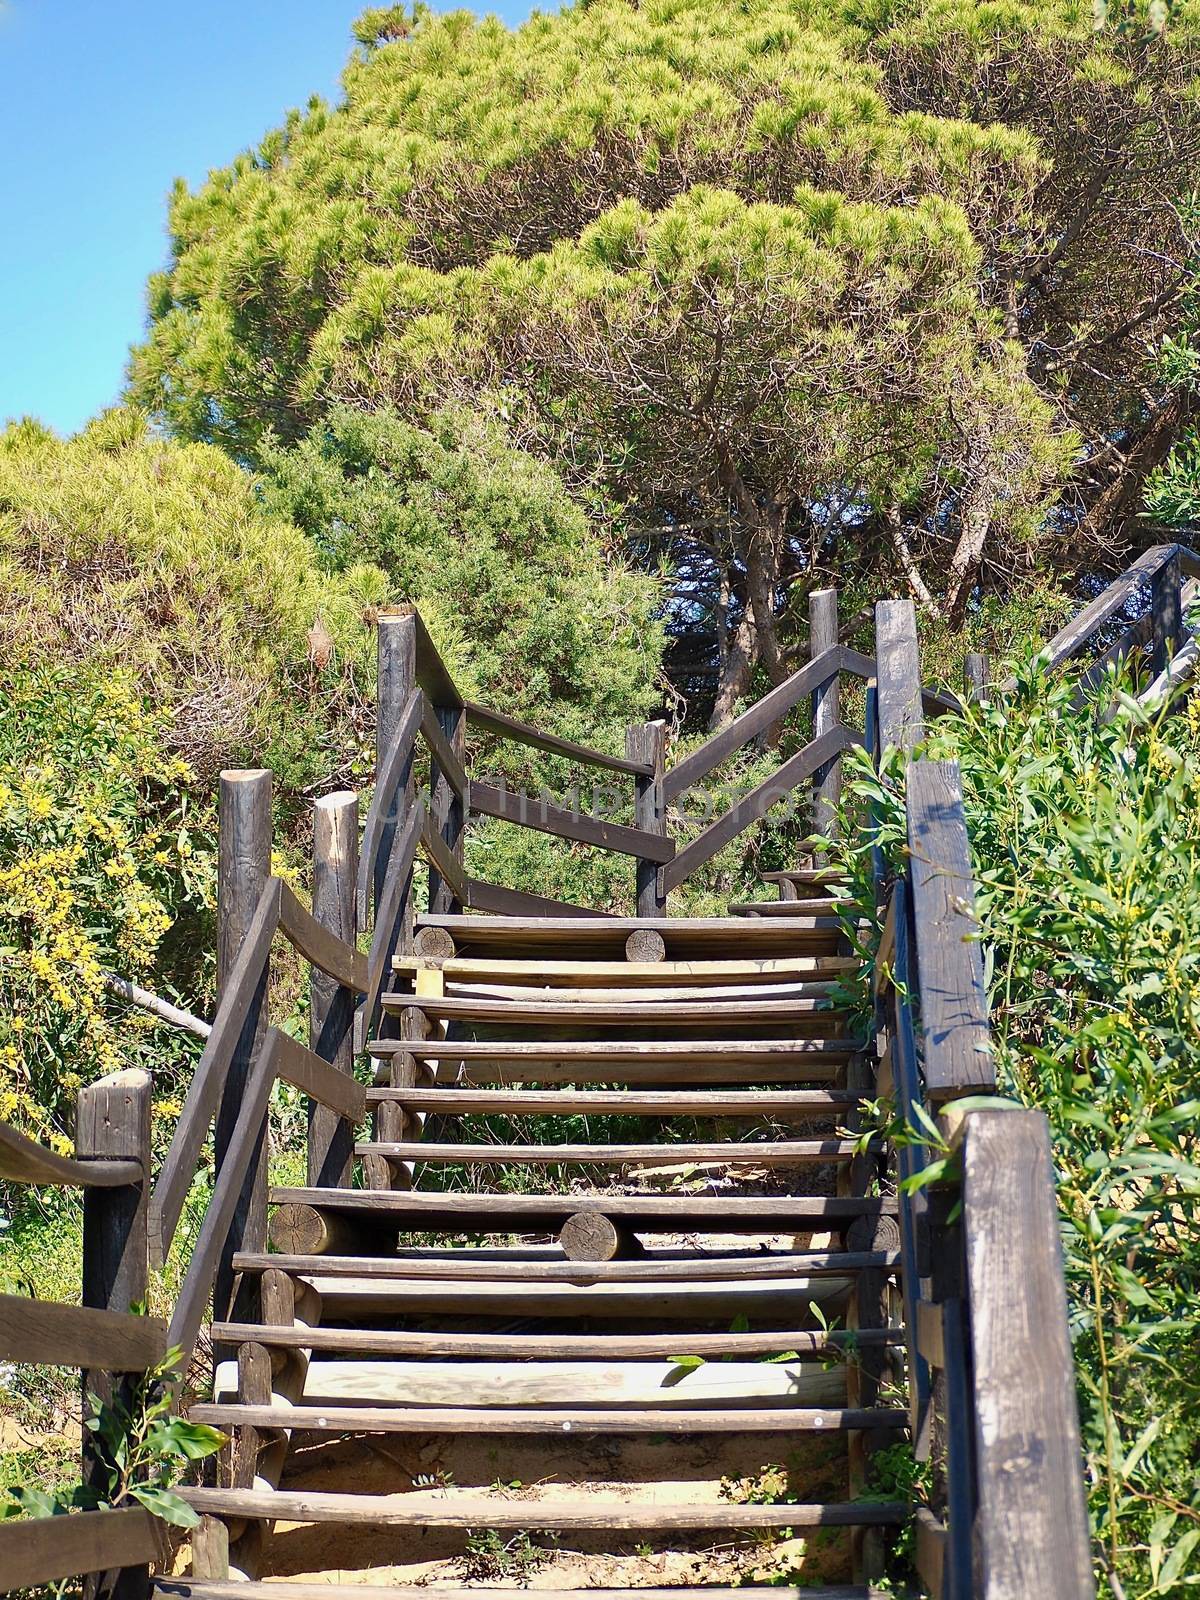 Wooden stair, footpath into the wild Algarve nature in Portugal